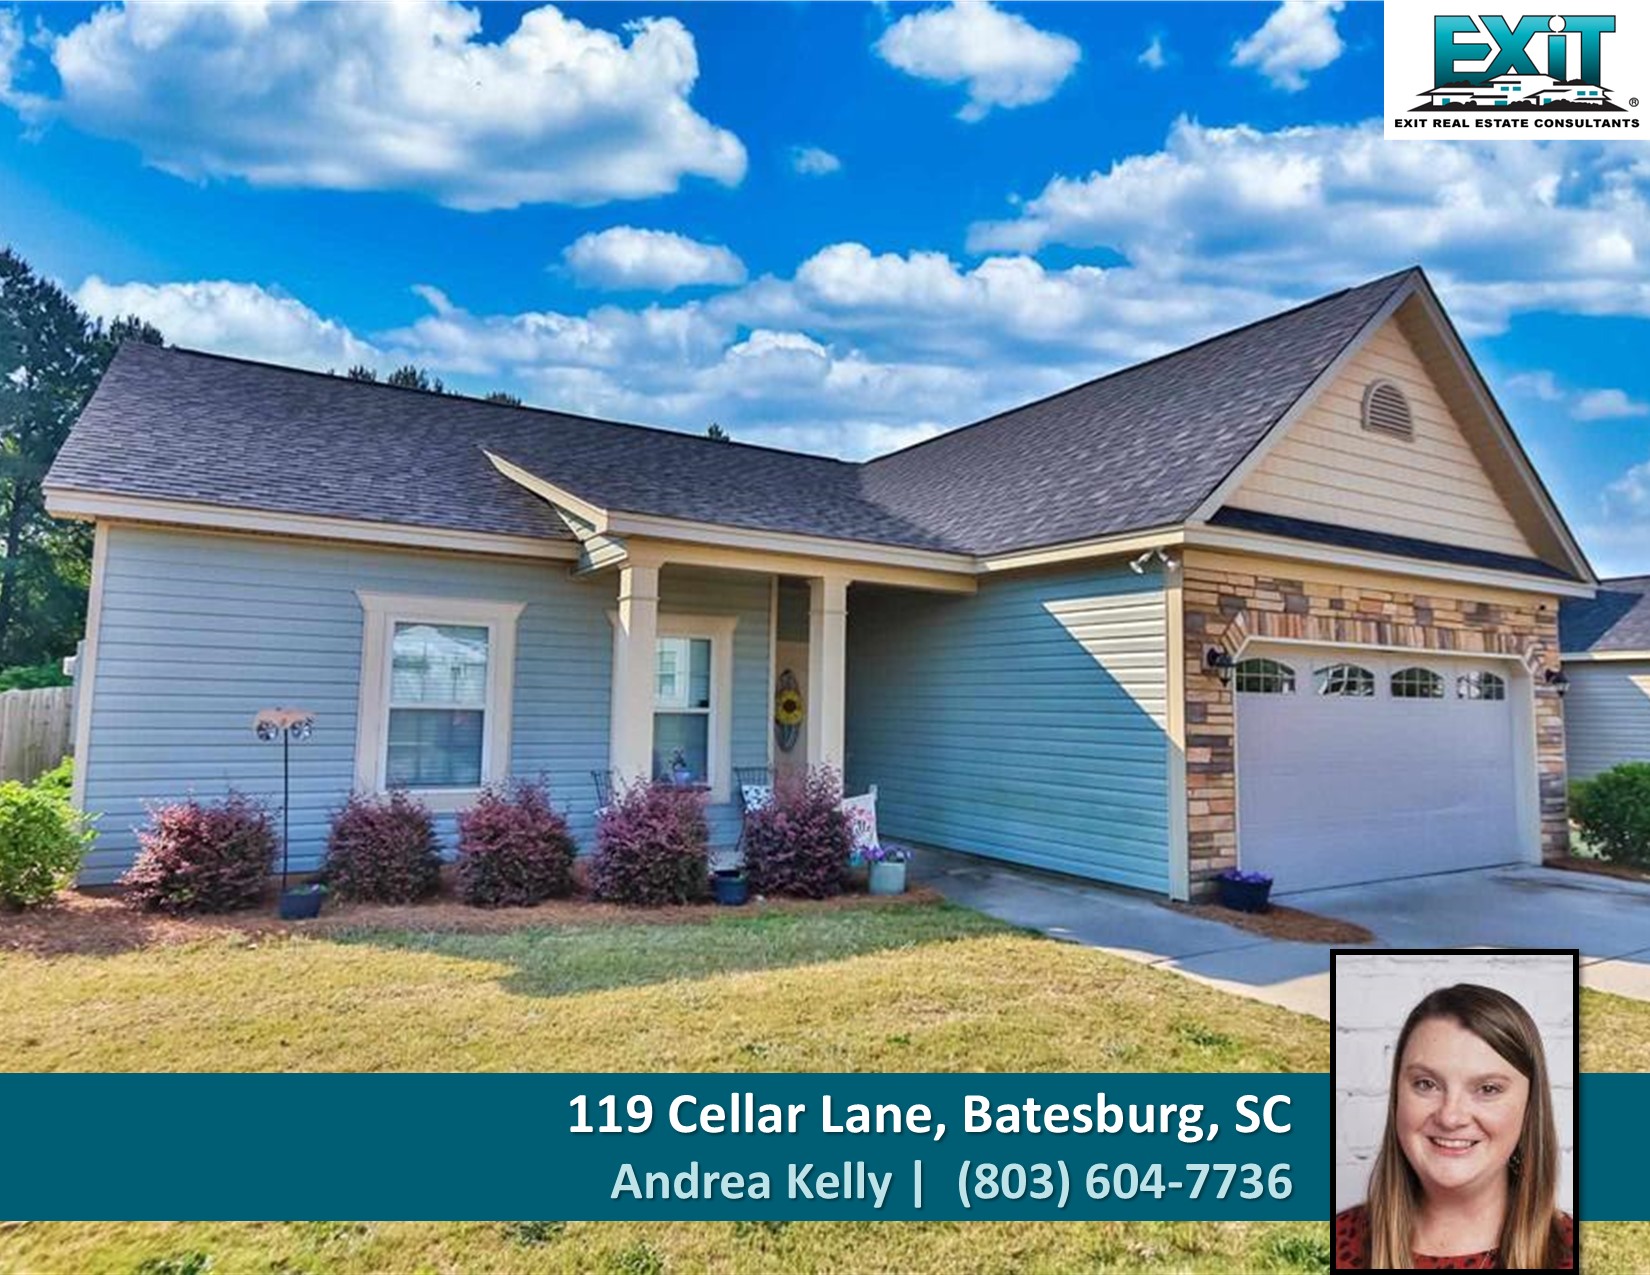 Just listed in Summerland - Batesburg